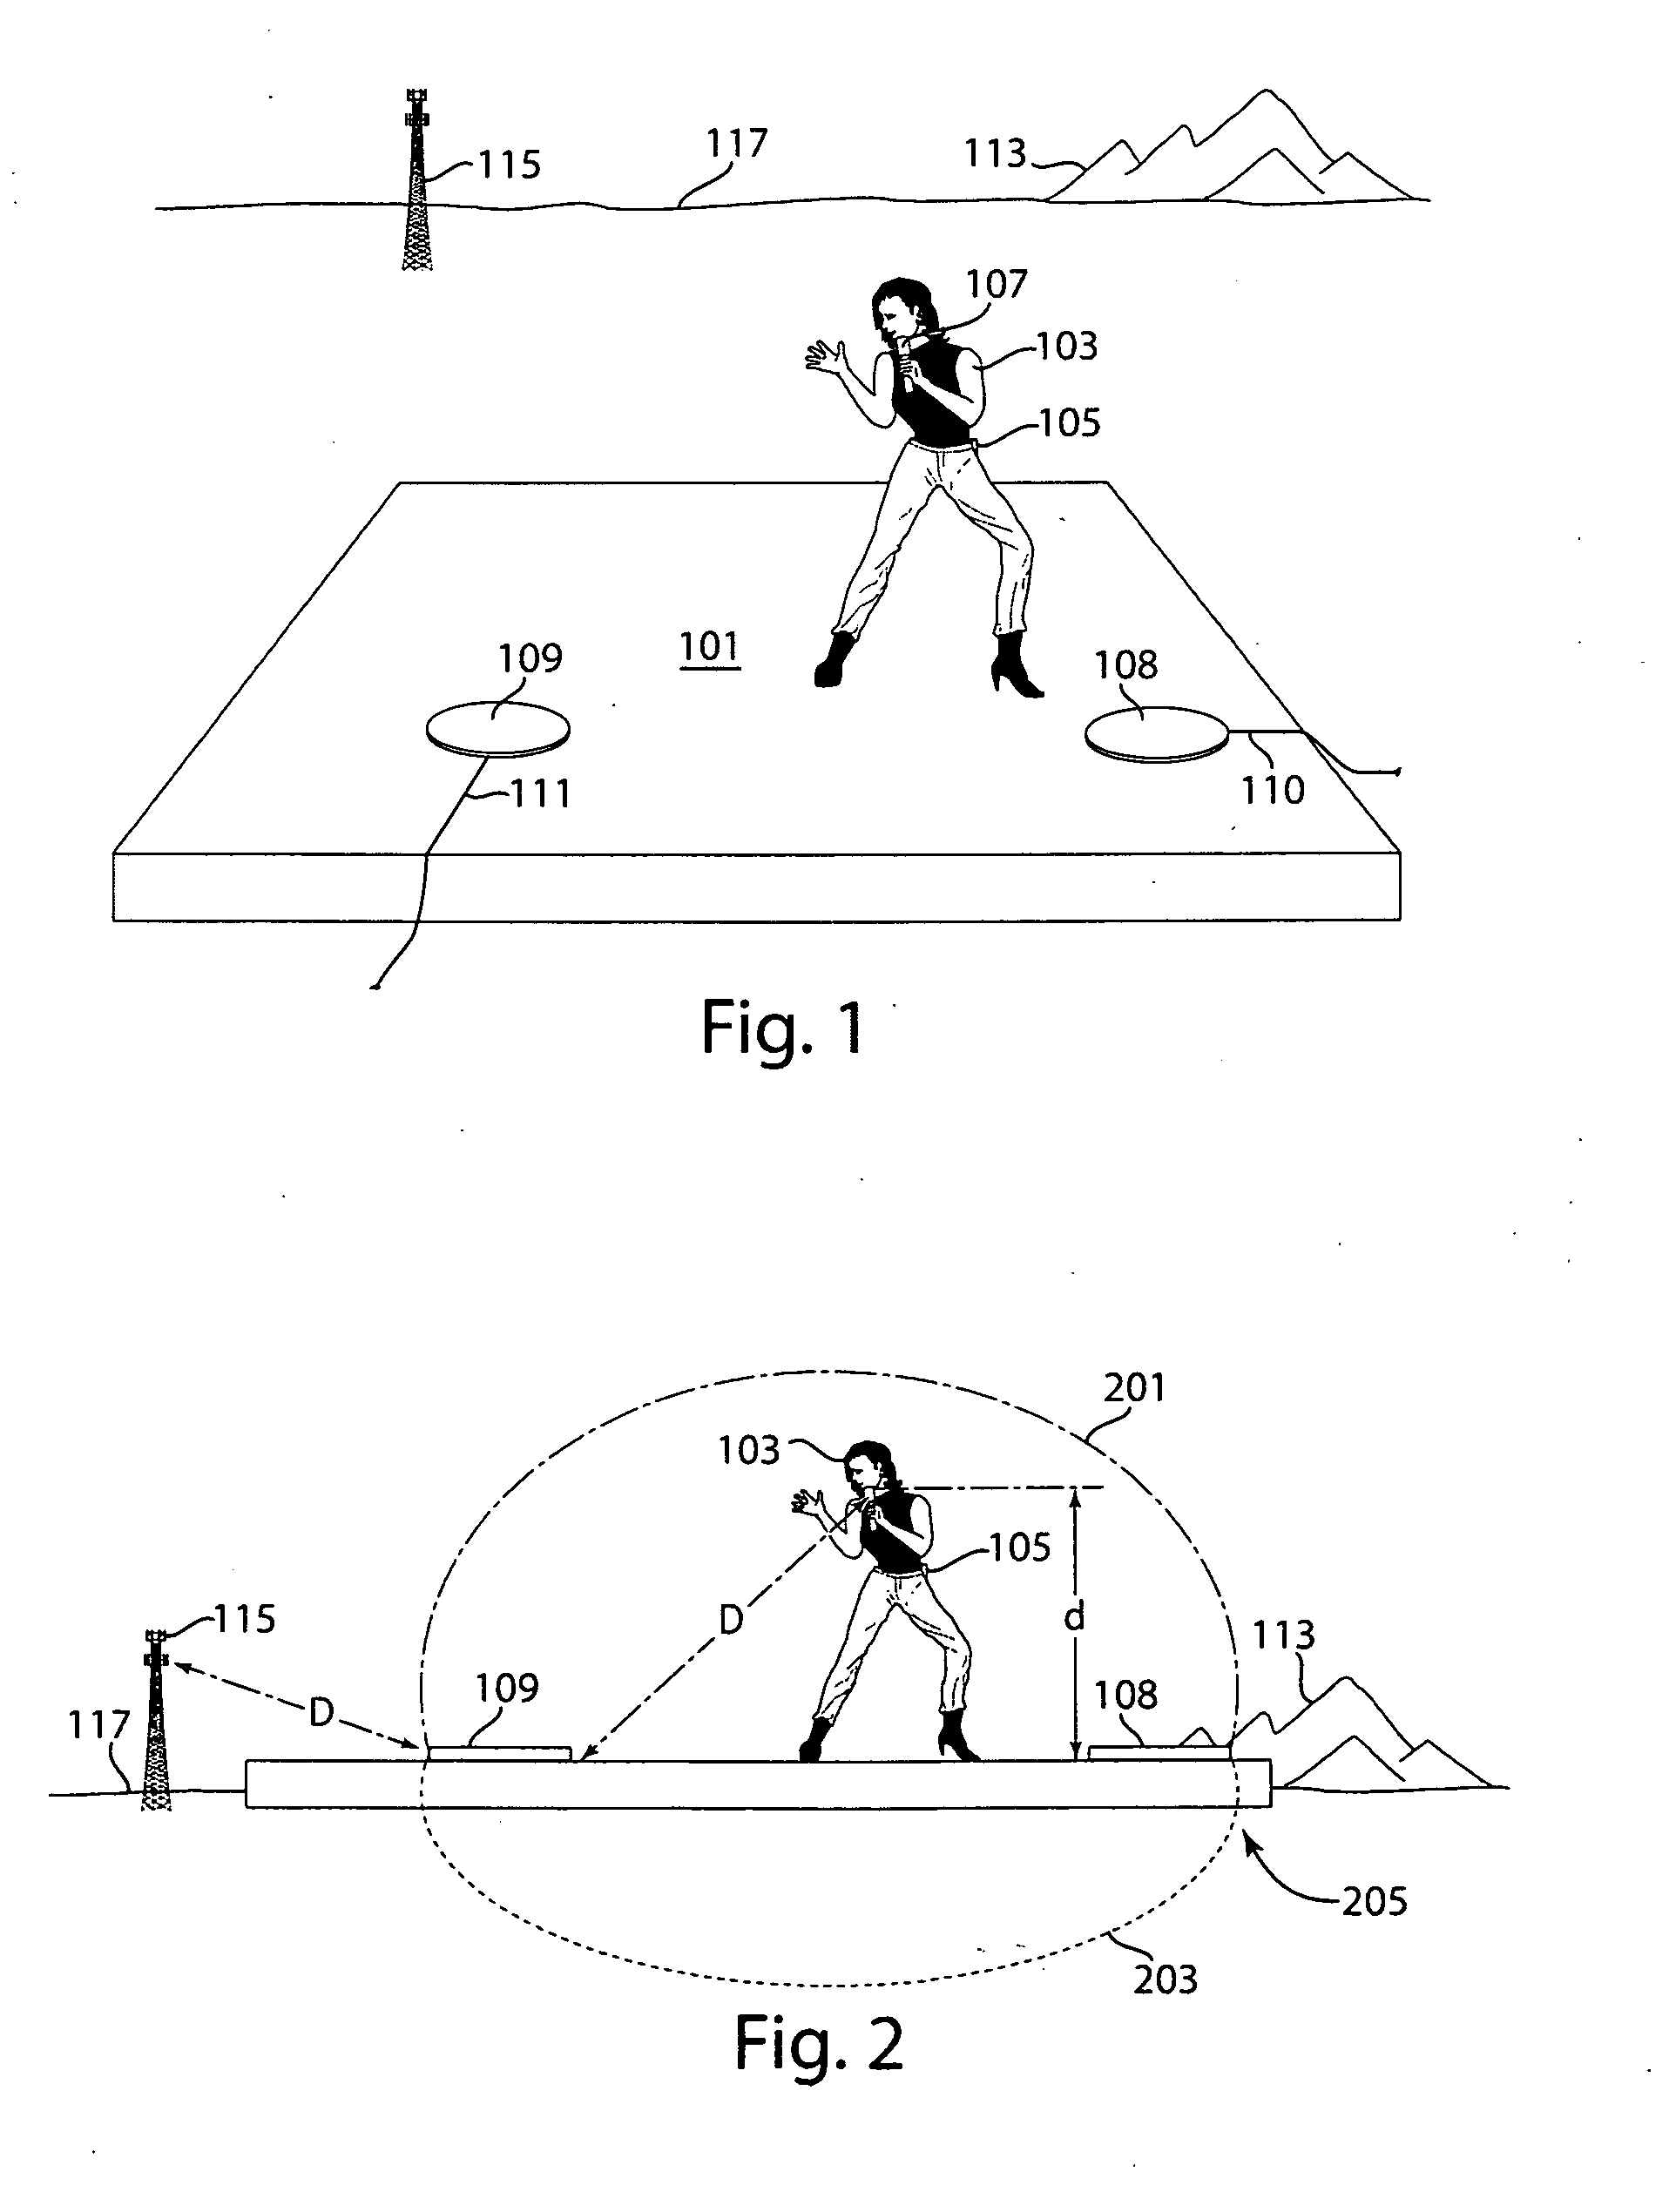 Wireless conformal antenna system and method of operation